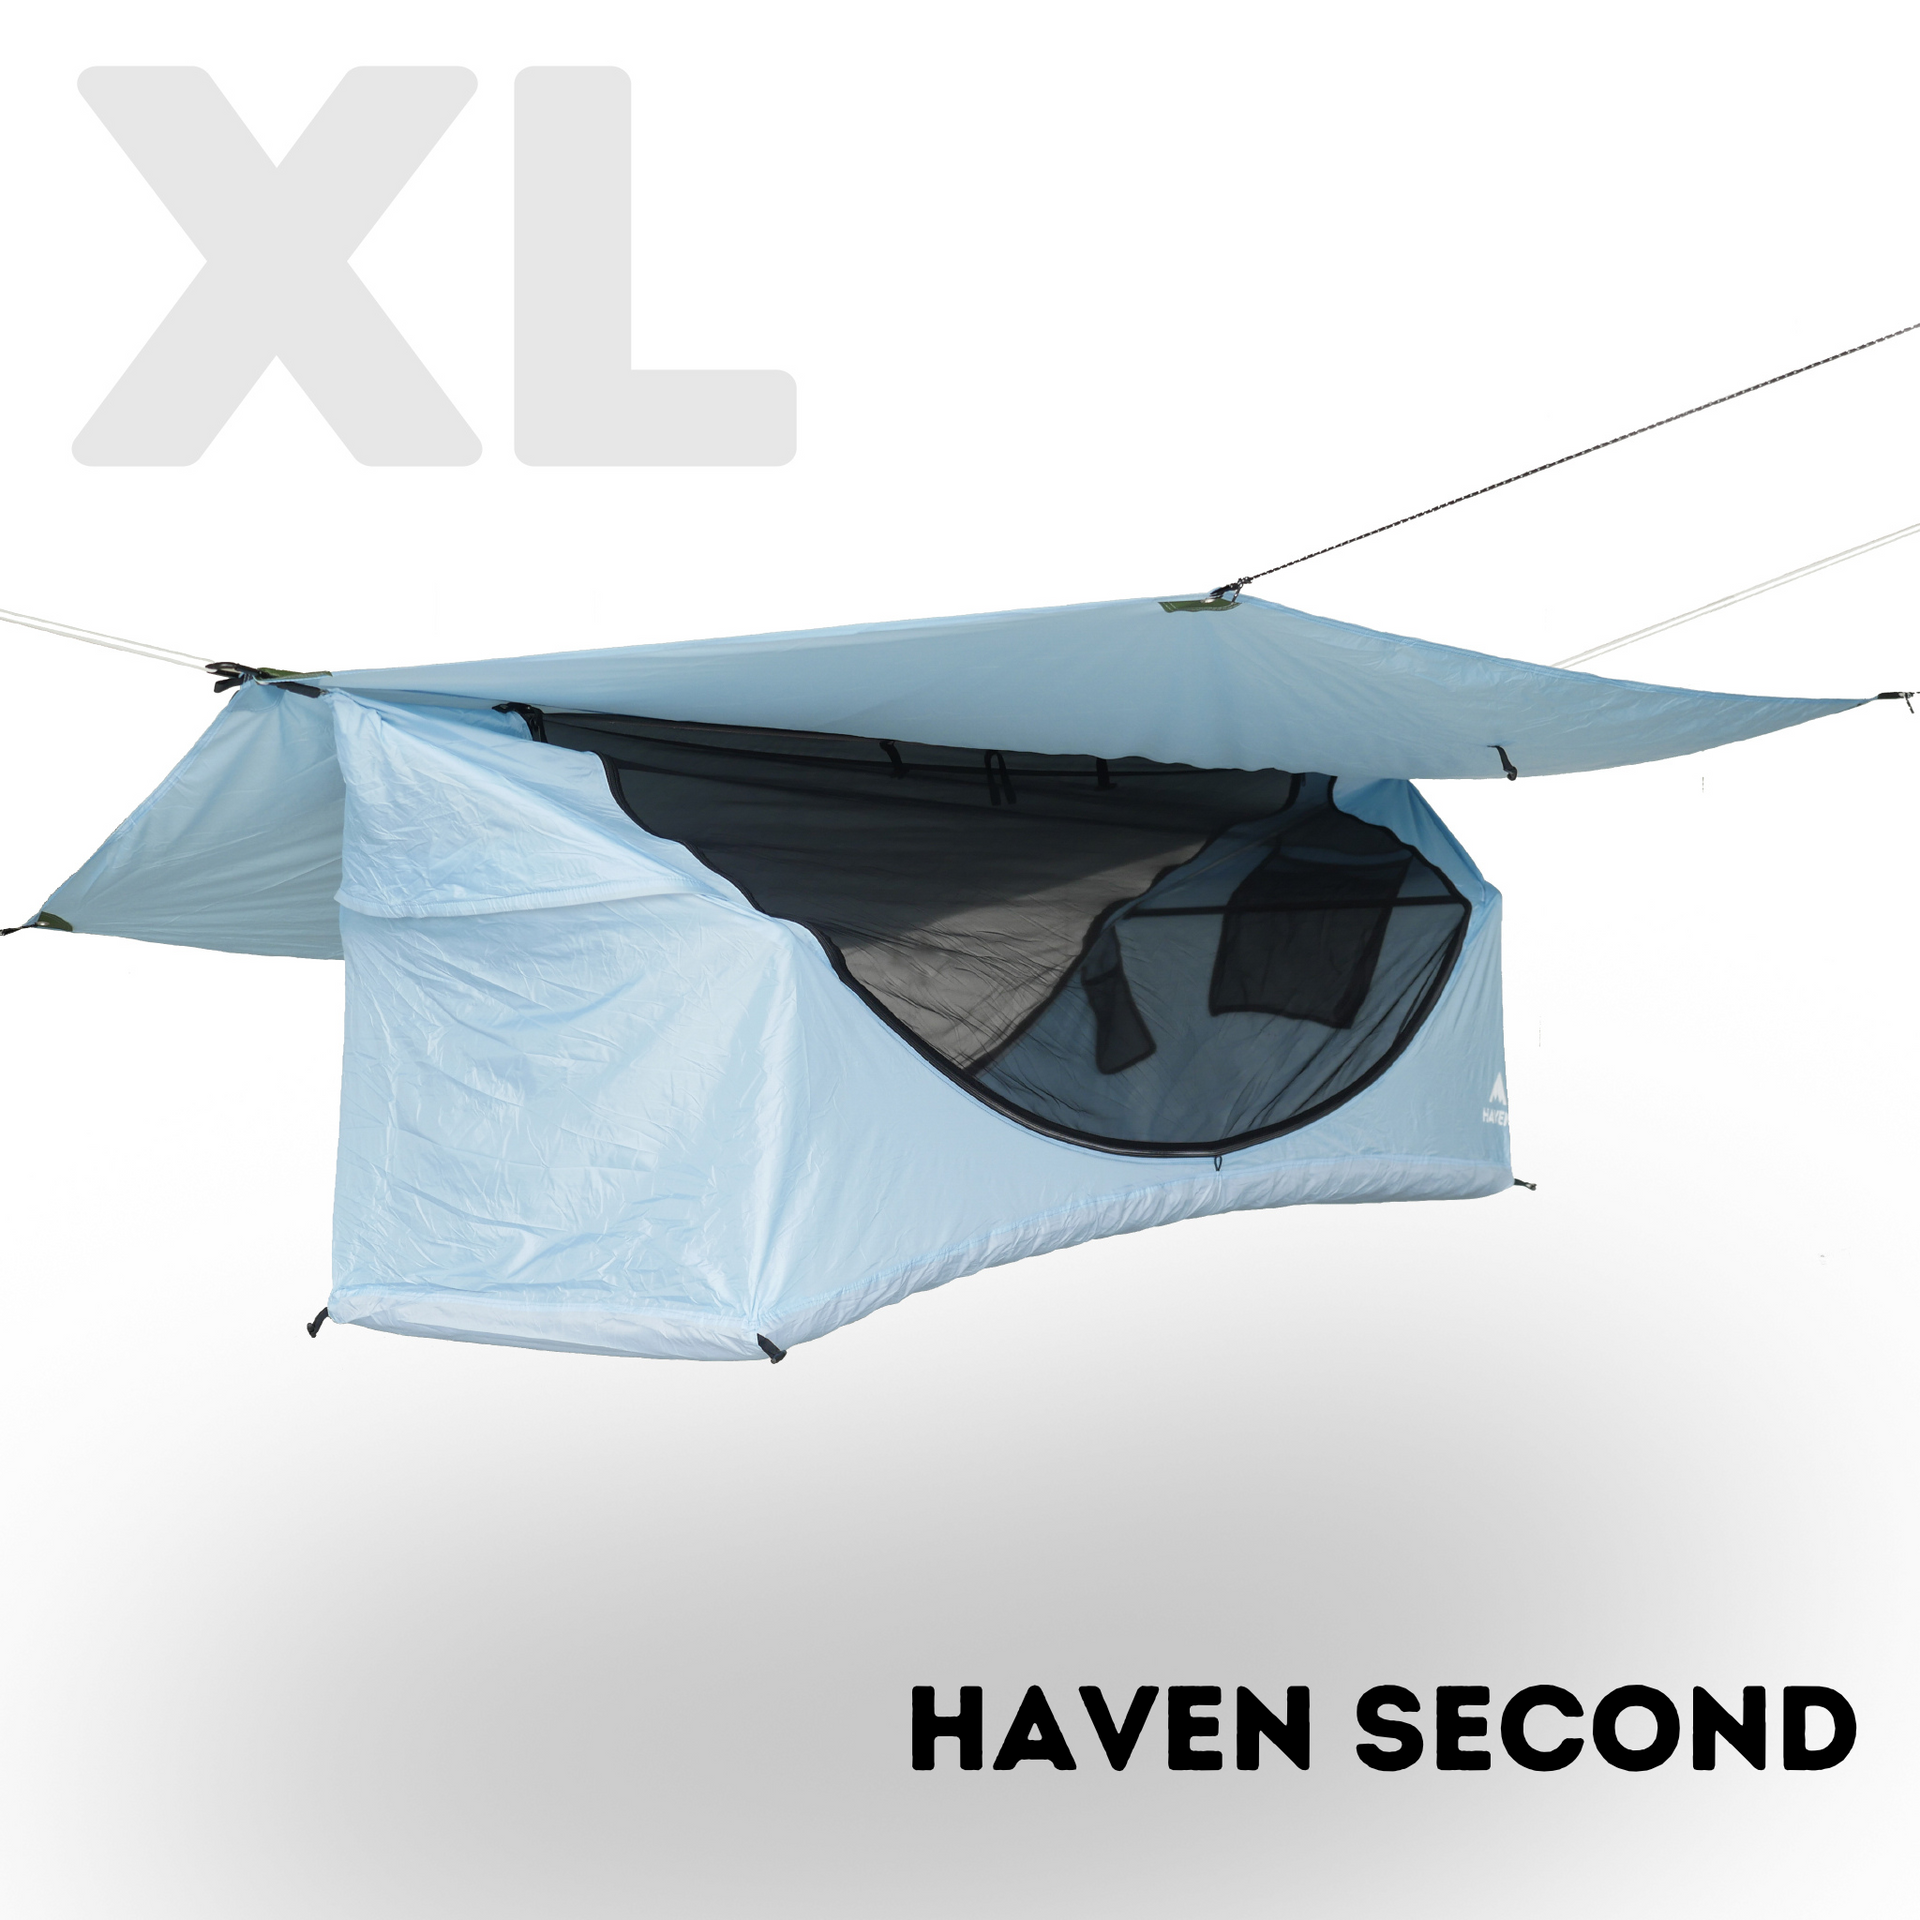 Buy a Secondhand Hammock Tent | Haven XL with Insulated Pad 